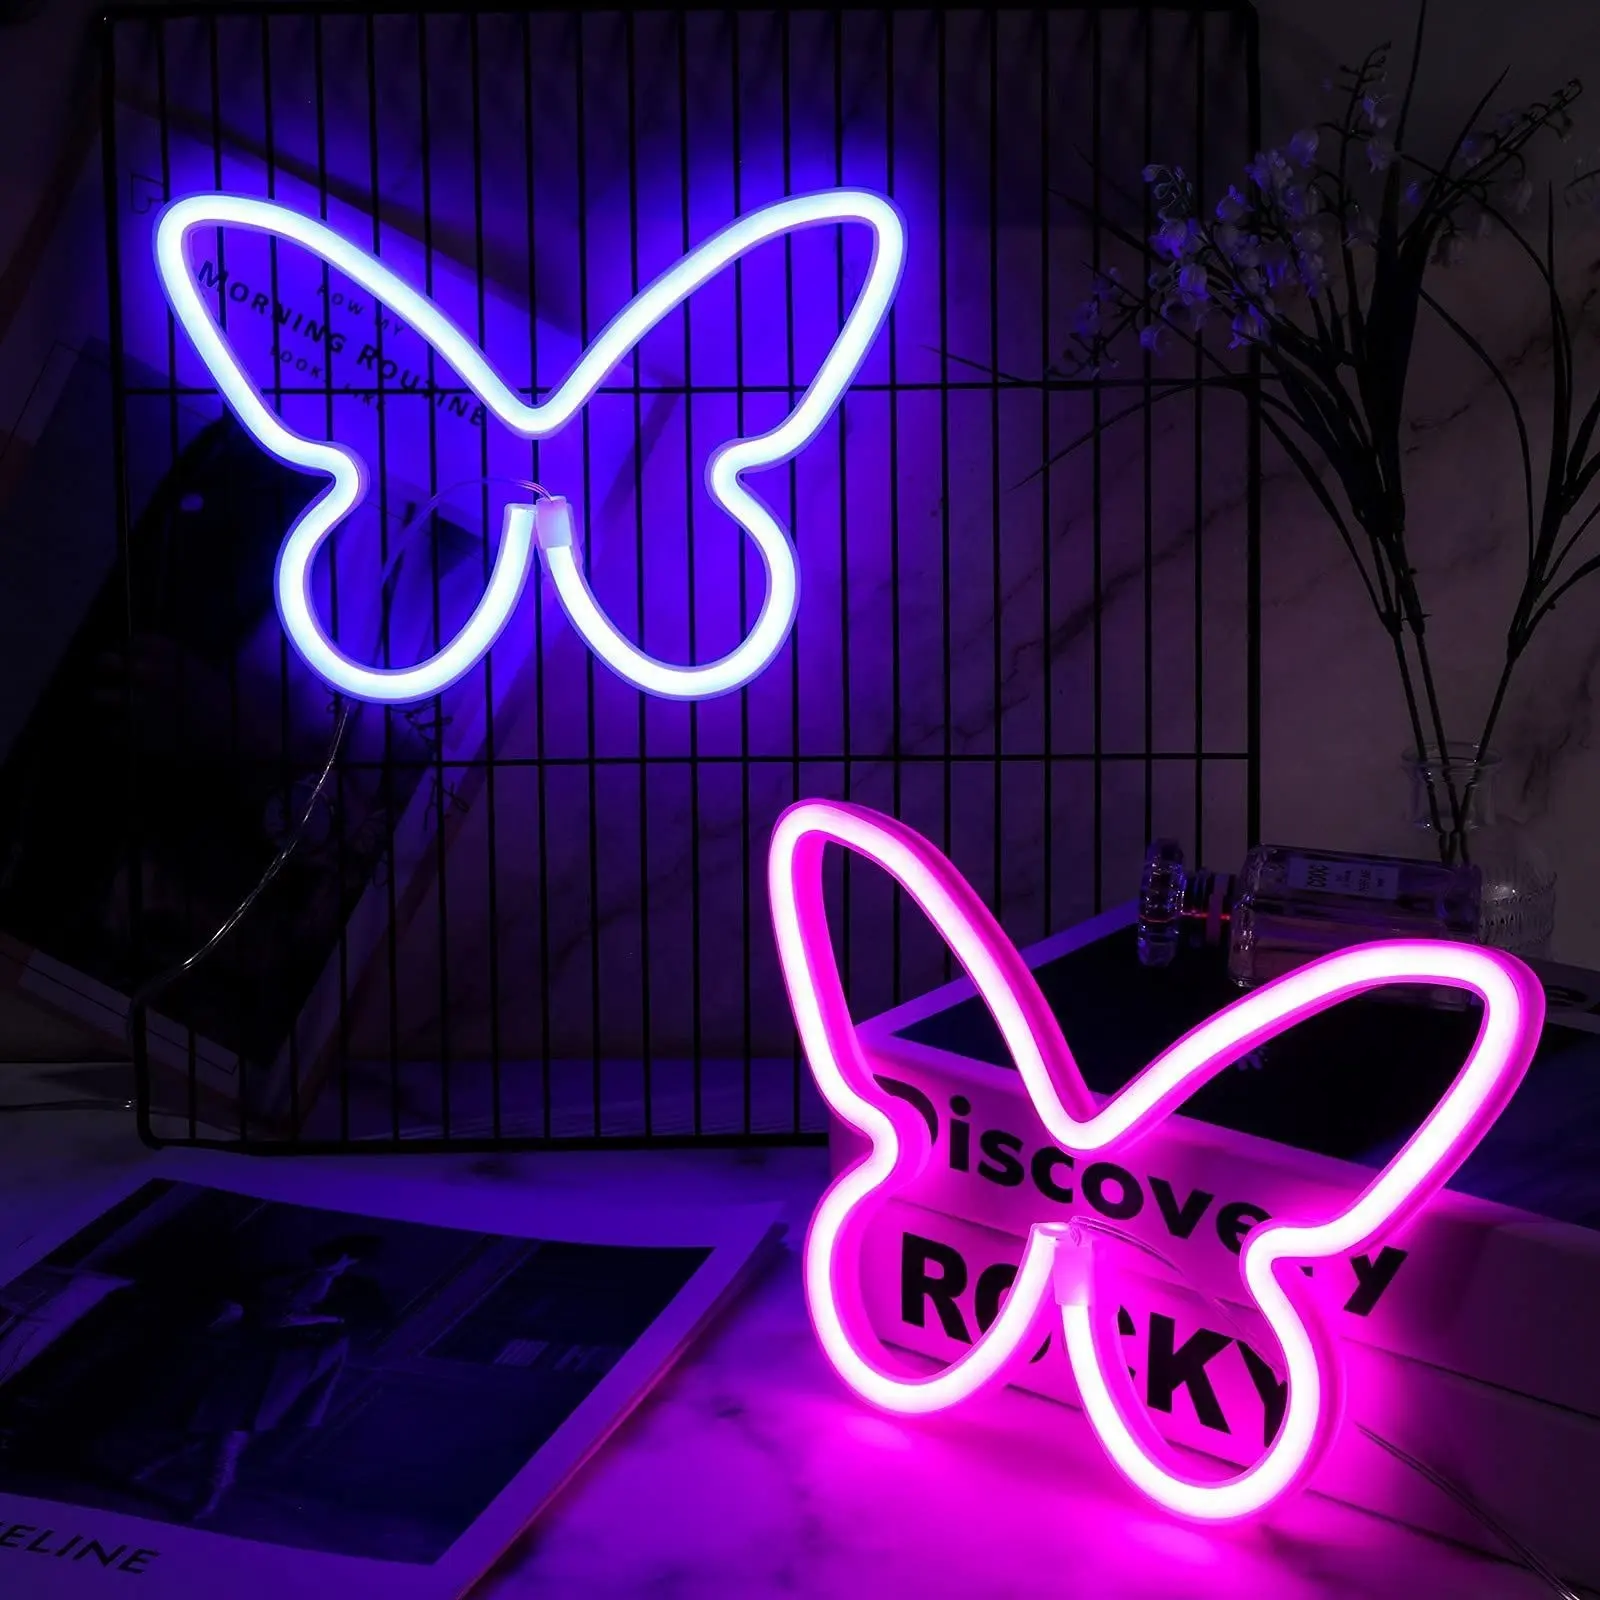 Butterfly Led Neon Lights Battery Operated Wall Art Sign For Kids Bedroom Home Party Decoration